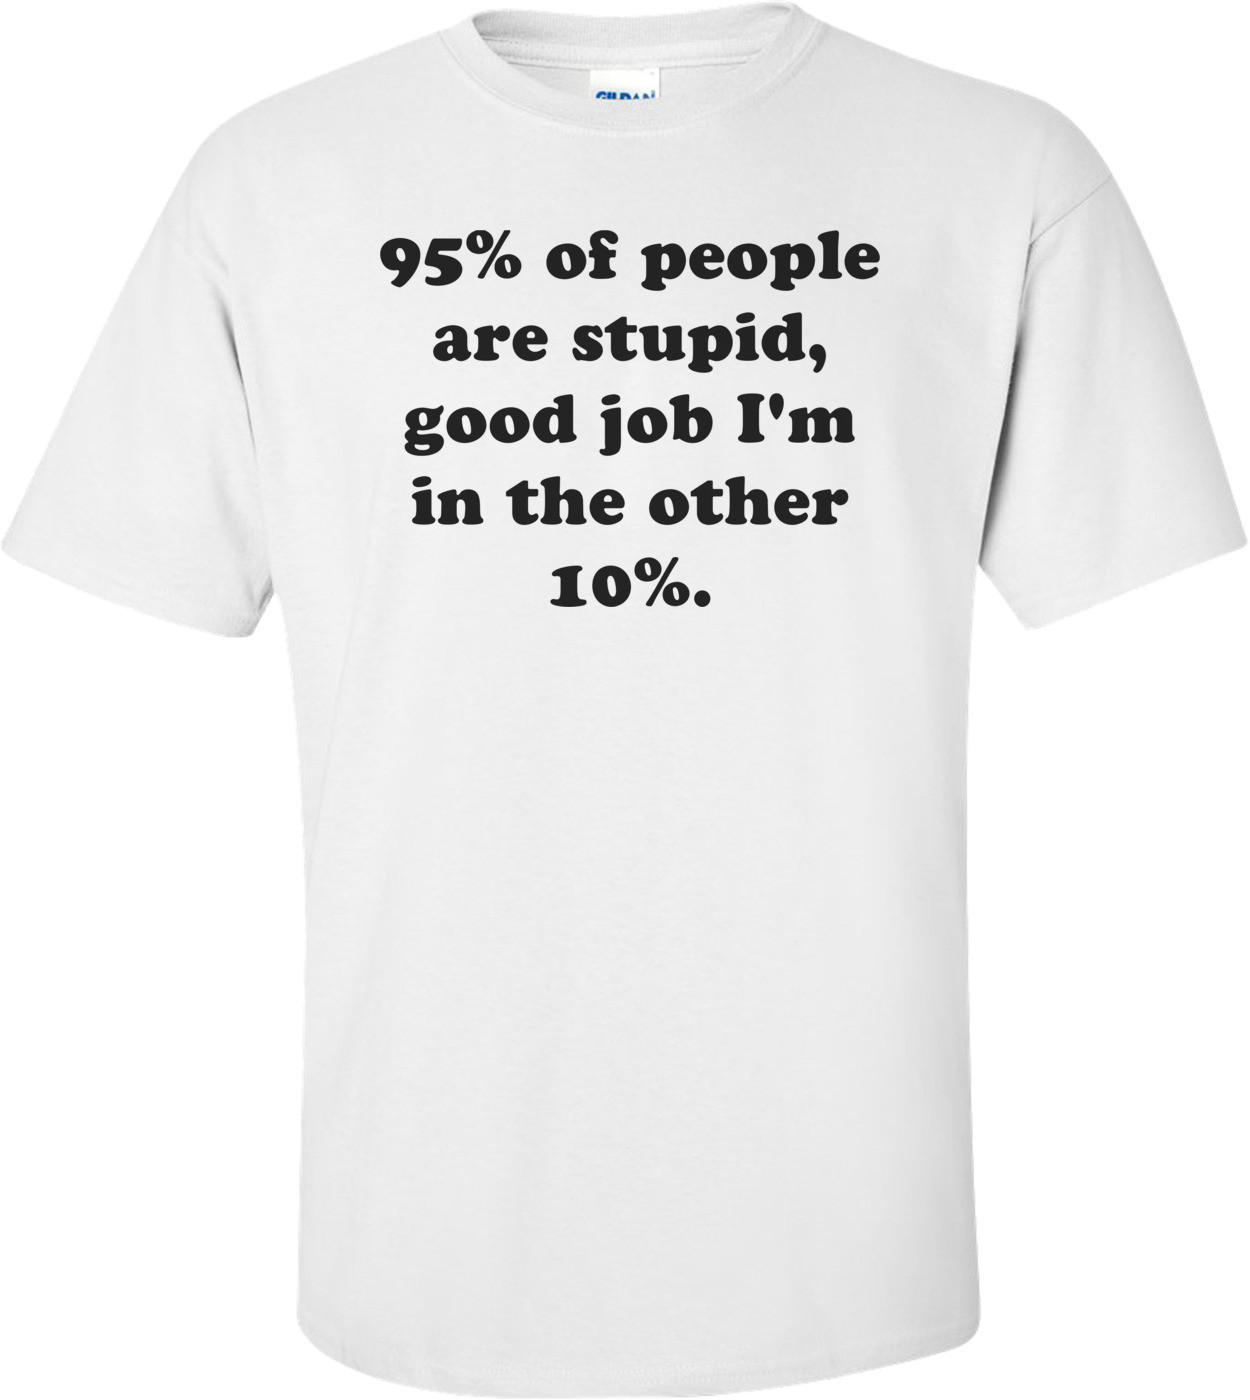 95% of people are stupid, good job I'm in the other 10%. Shirt